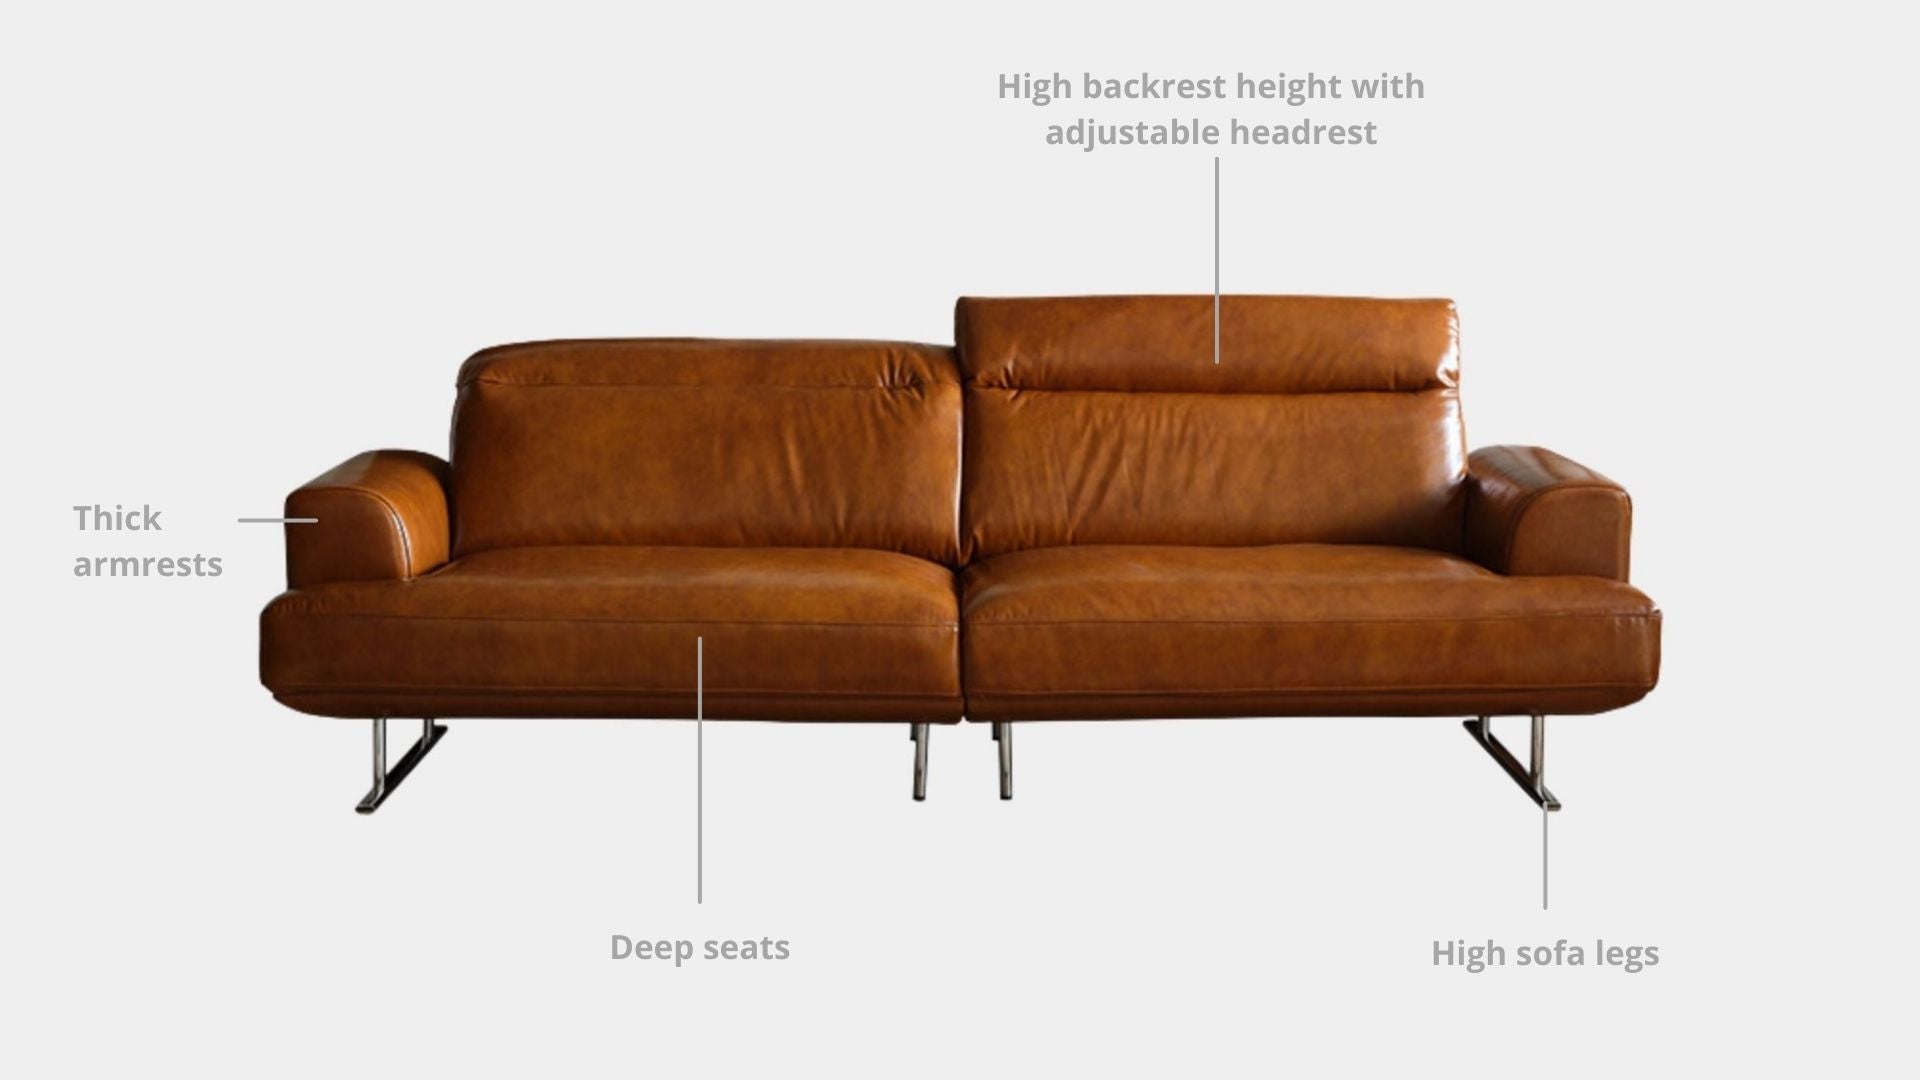 Key features such as armrest thickness, cushion height, seat depth and sofa leg height for Charles Half Leather Sofa